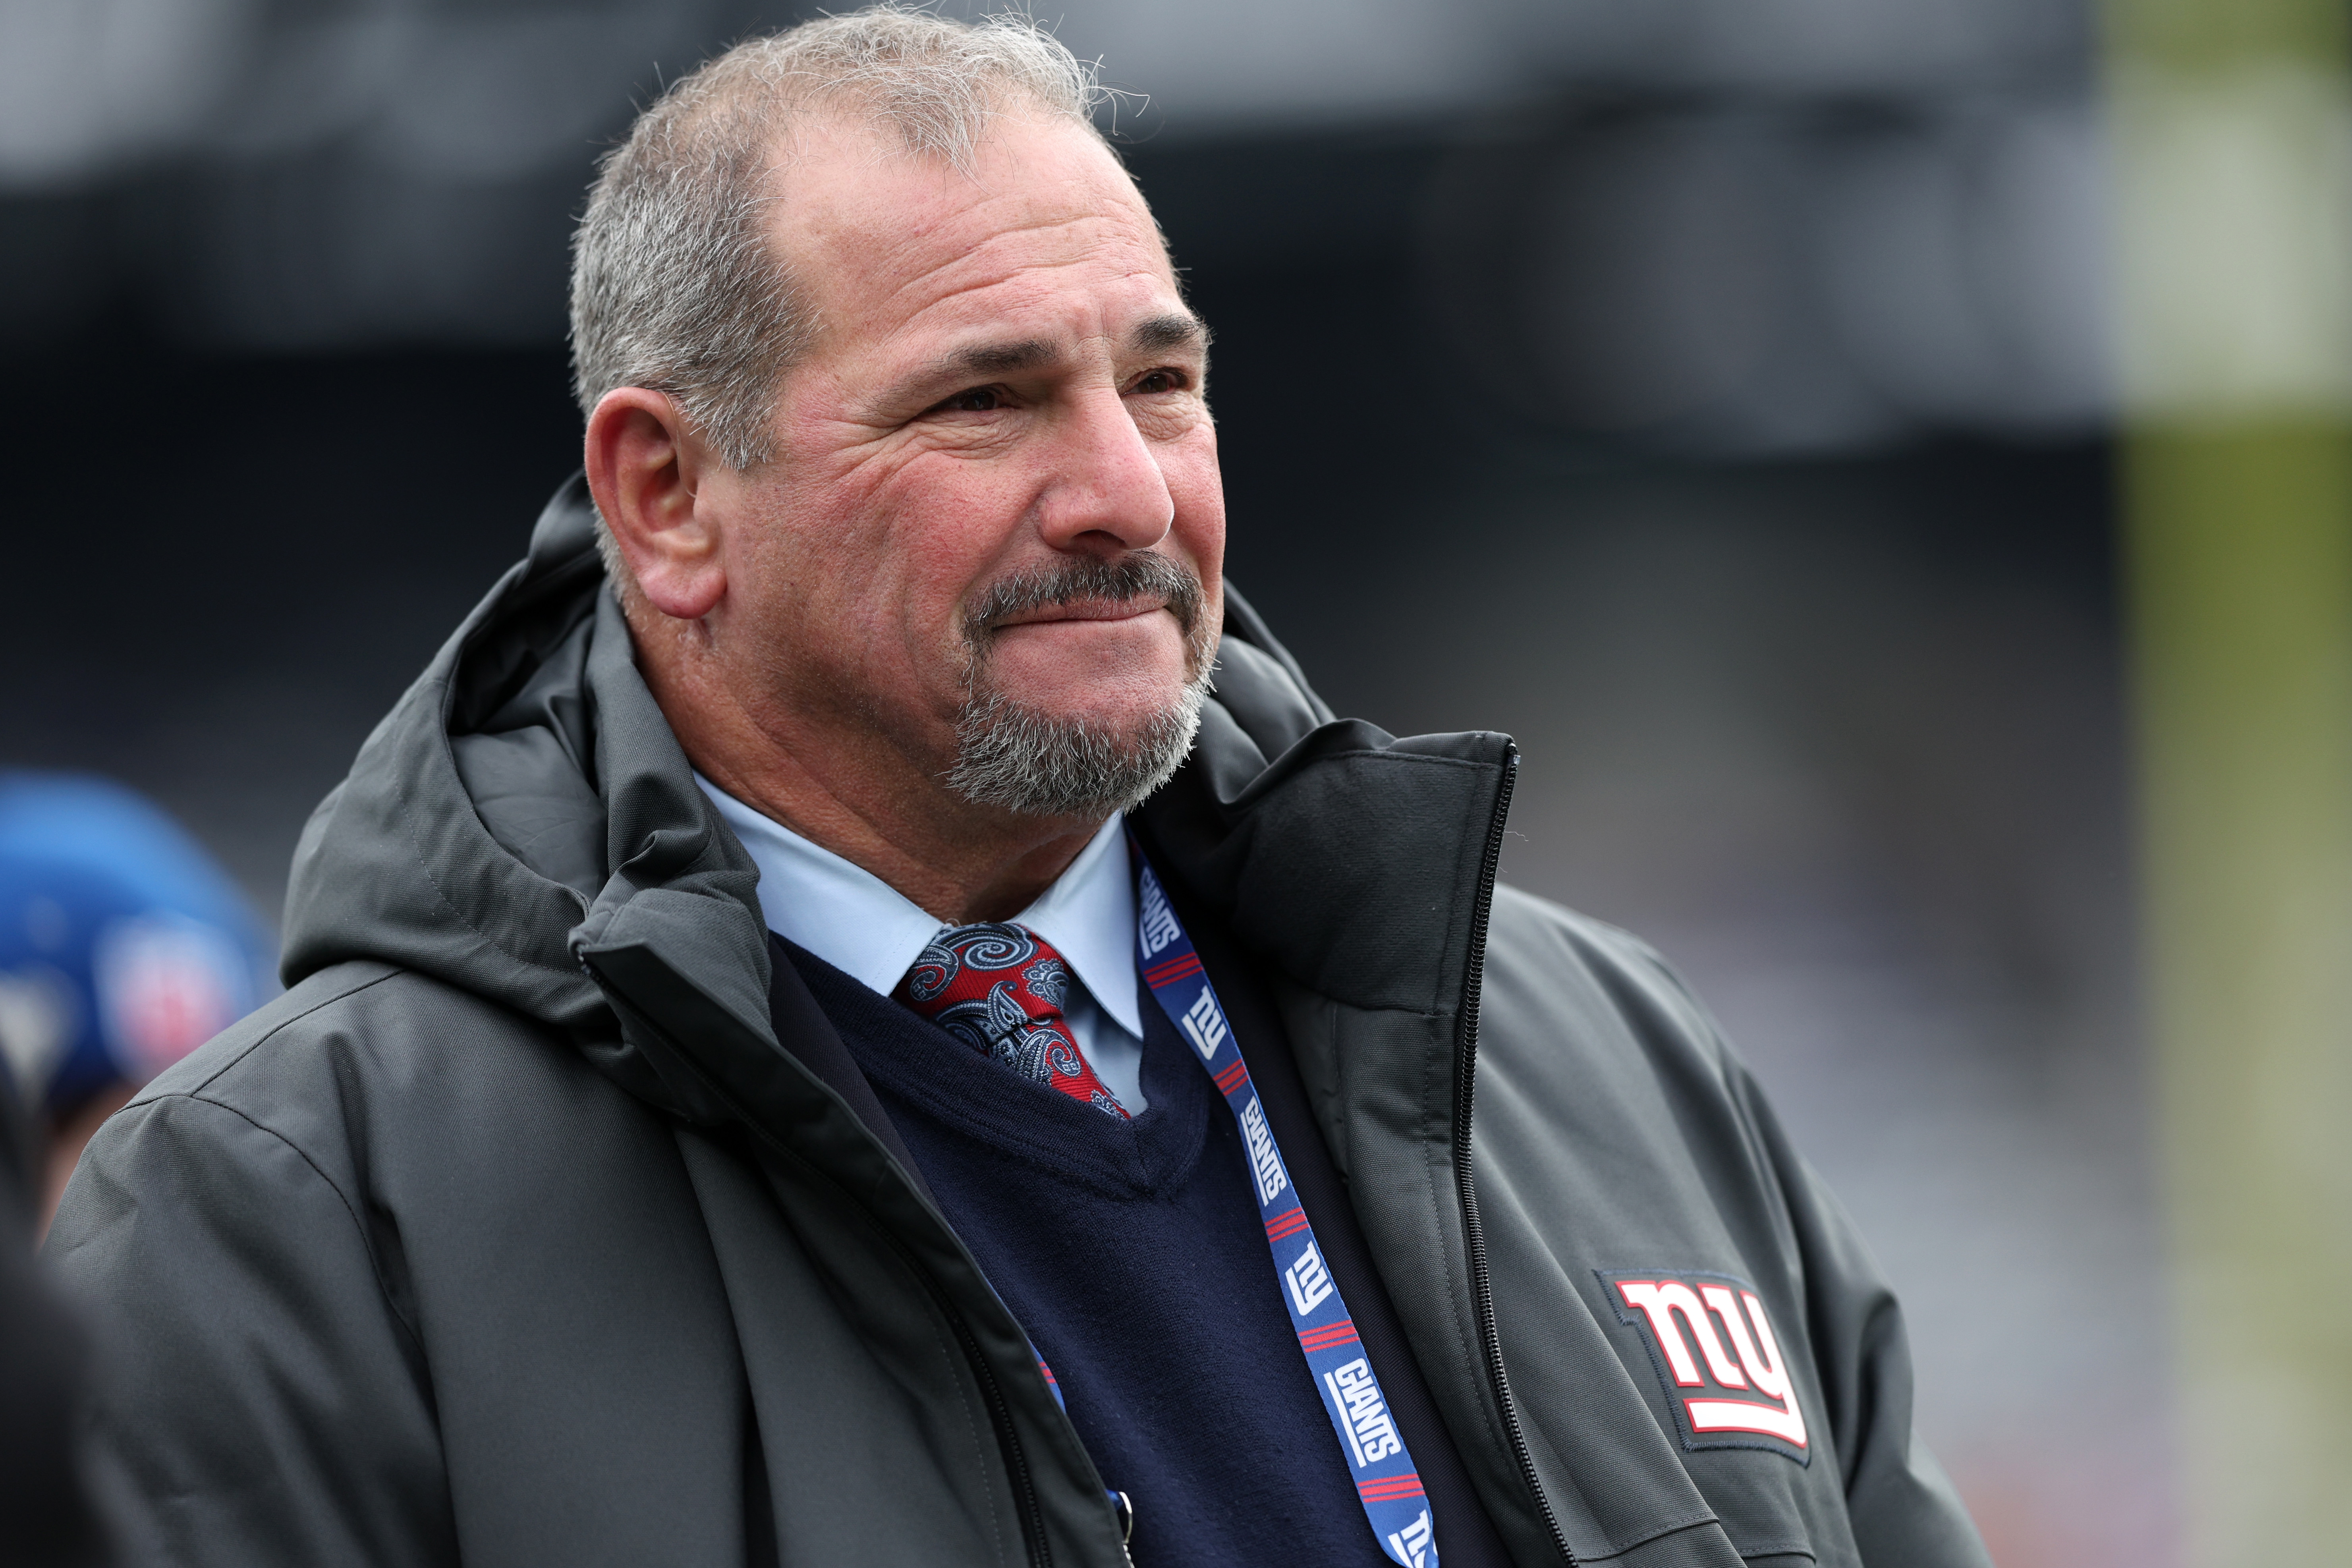 Giants GM Dave Gettleman Retires After 19-46 Record over 4 Seasons